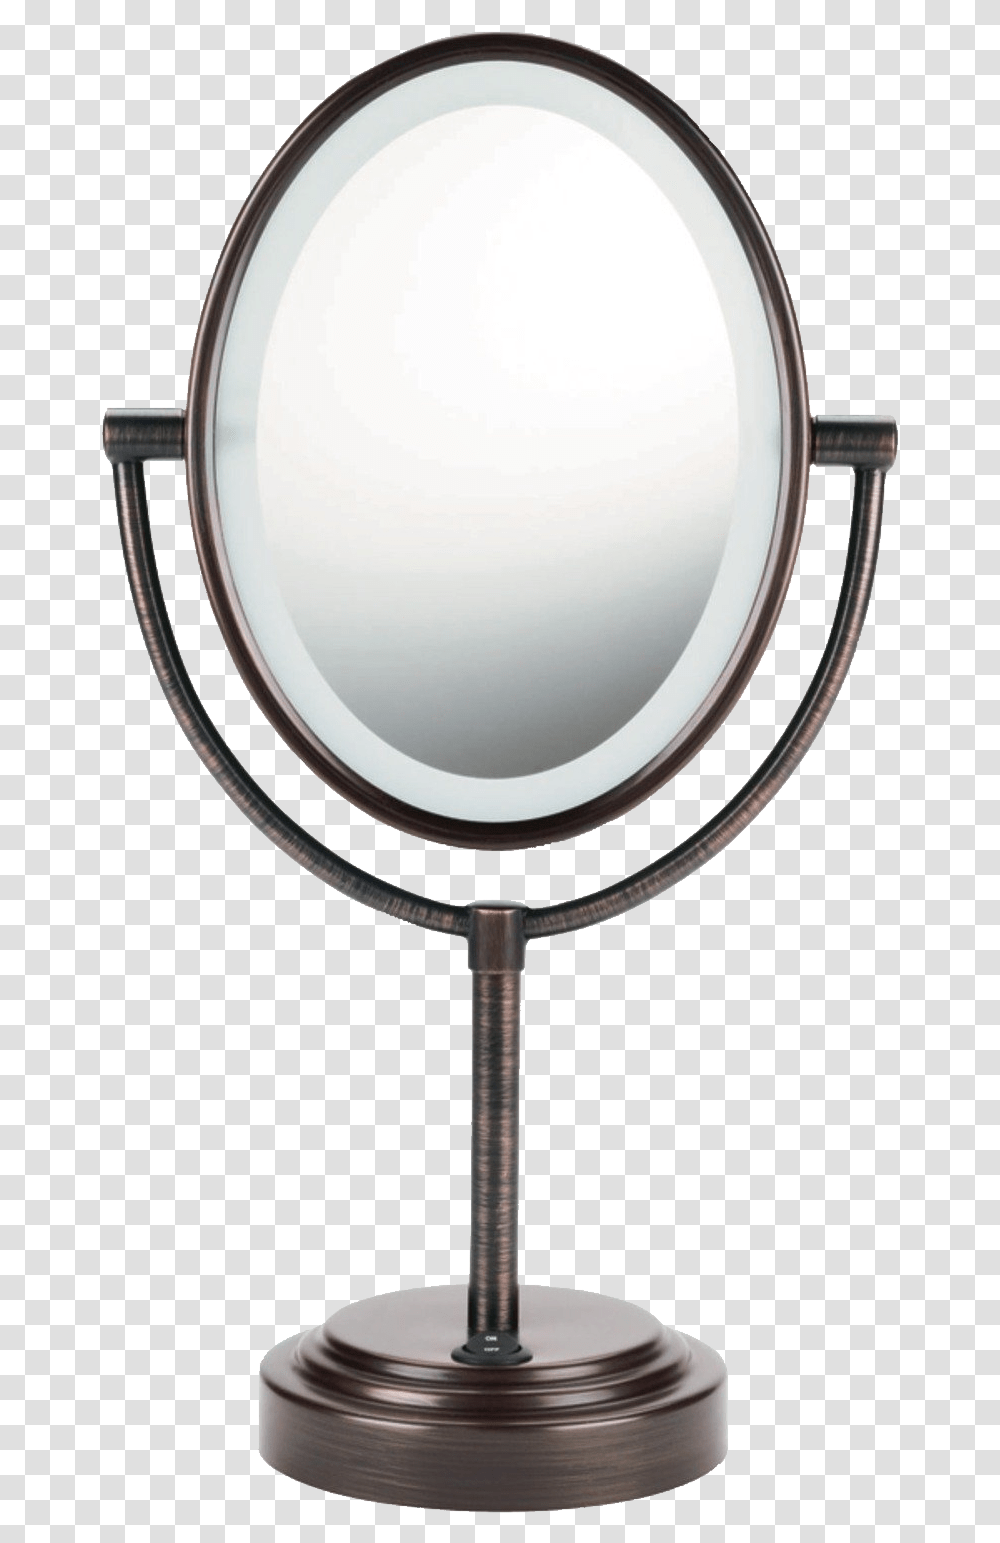 Mirror Image Web Icons Bronze Lighted Mirror, Lamp, Magnifying, Fisheye, Car Mirror Transparent Png